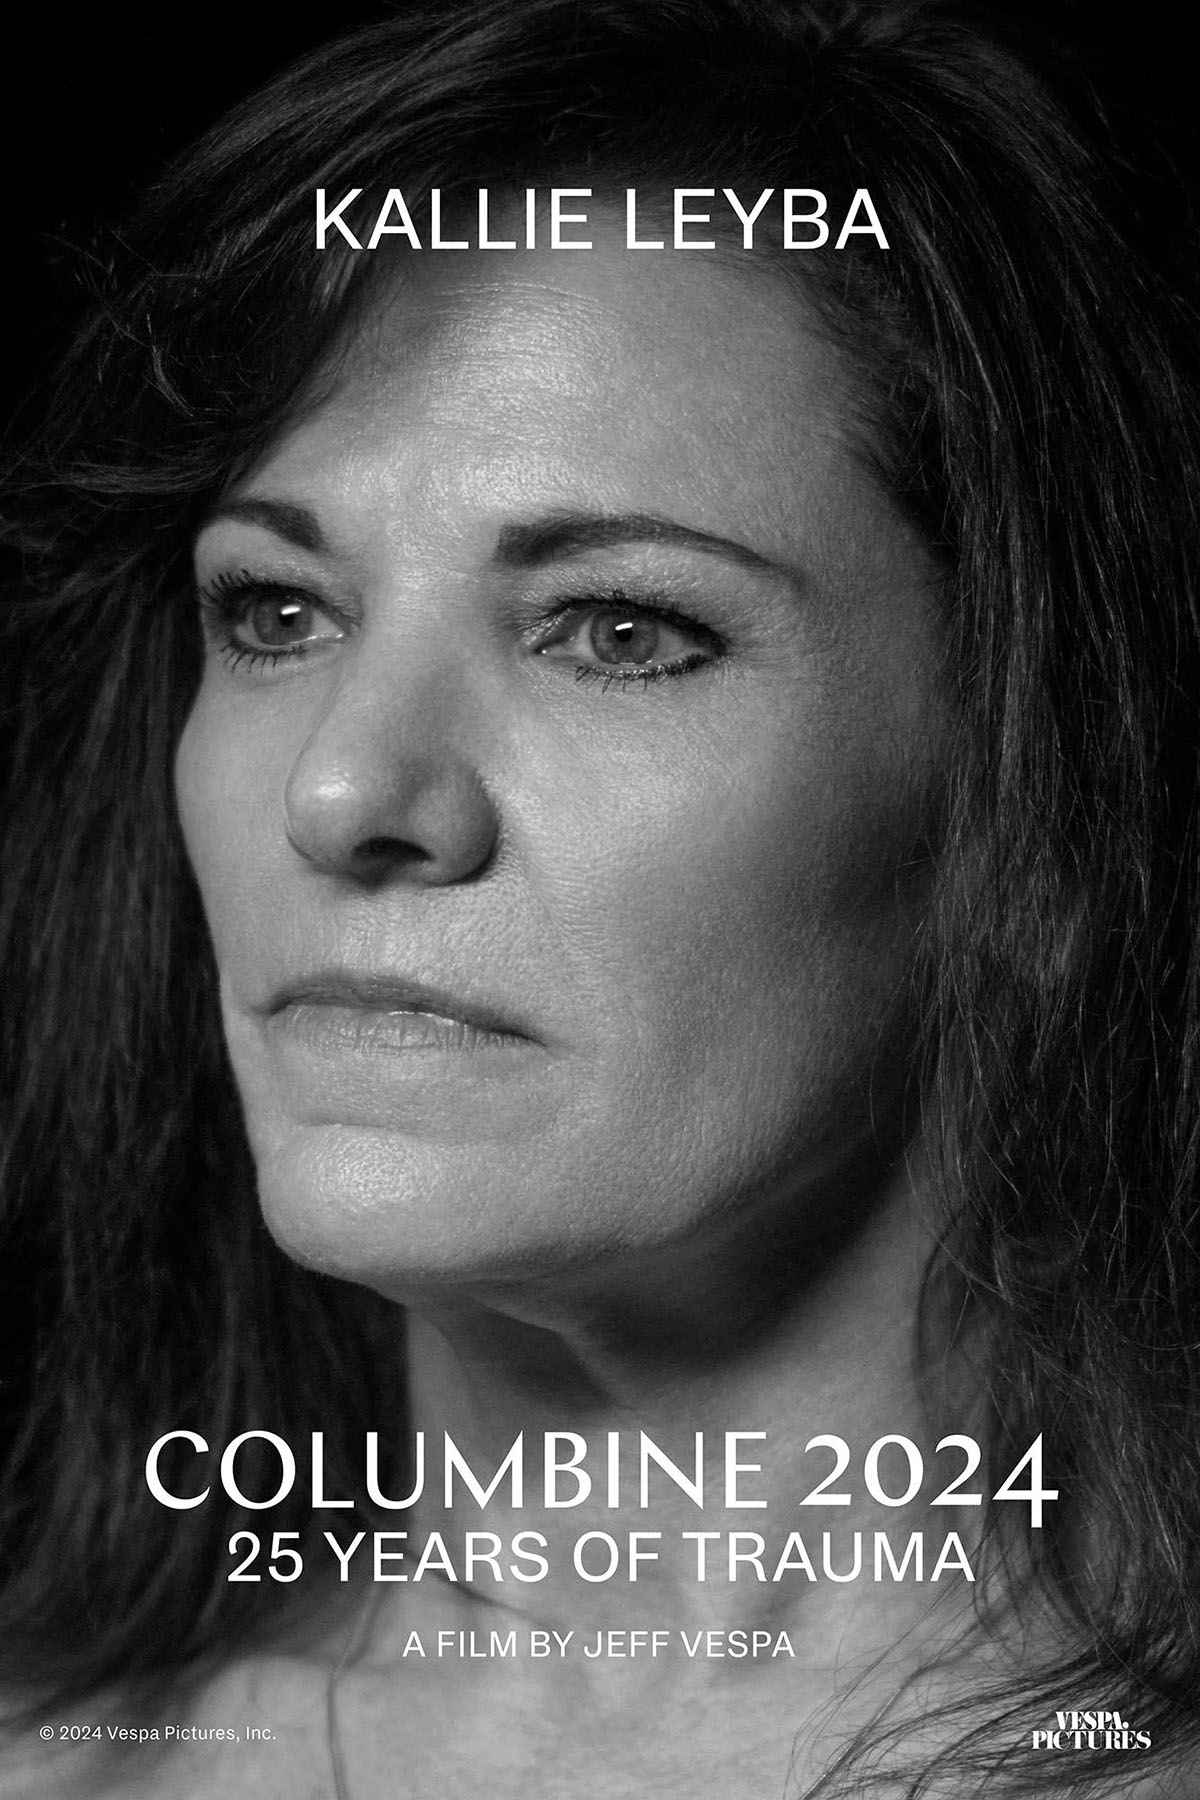 A poster for the documentary "Columbine 2024: 25 years of Trauma" features a black and white picture of Kallie Leyba.